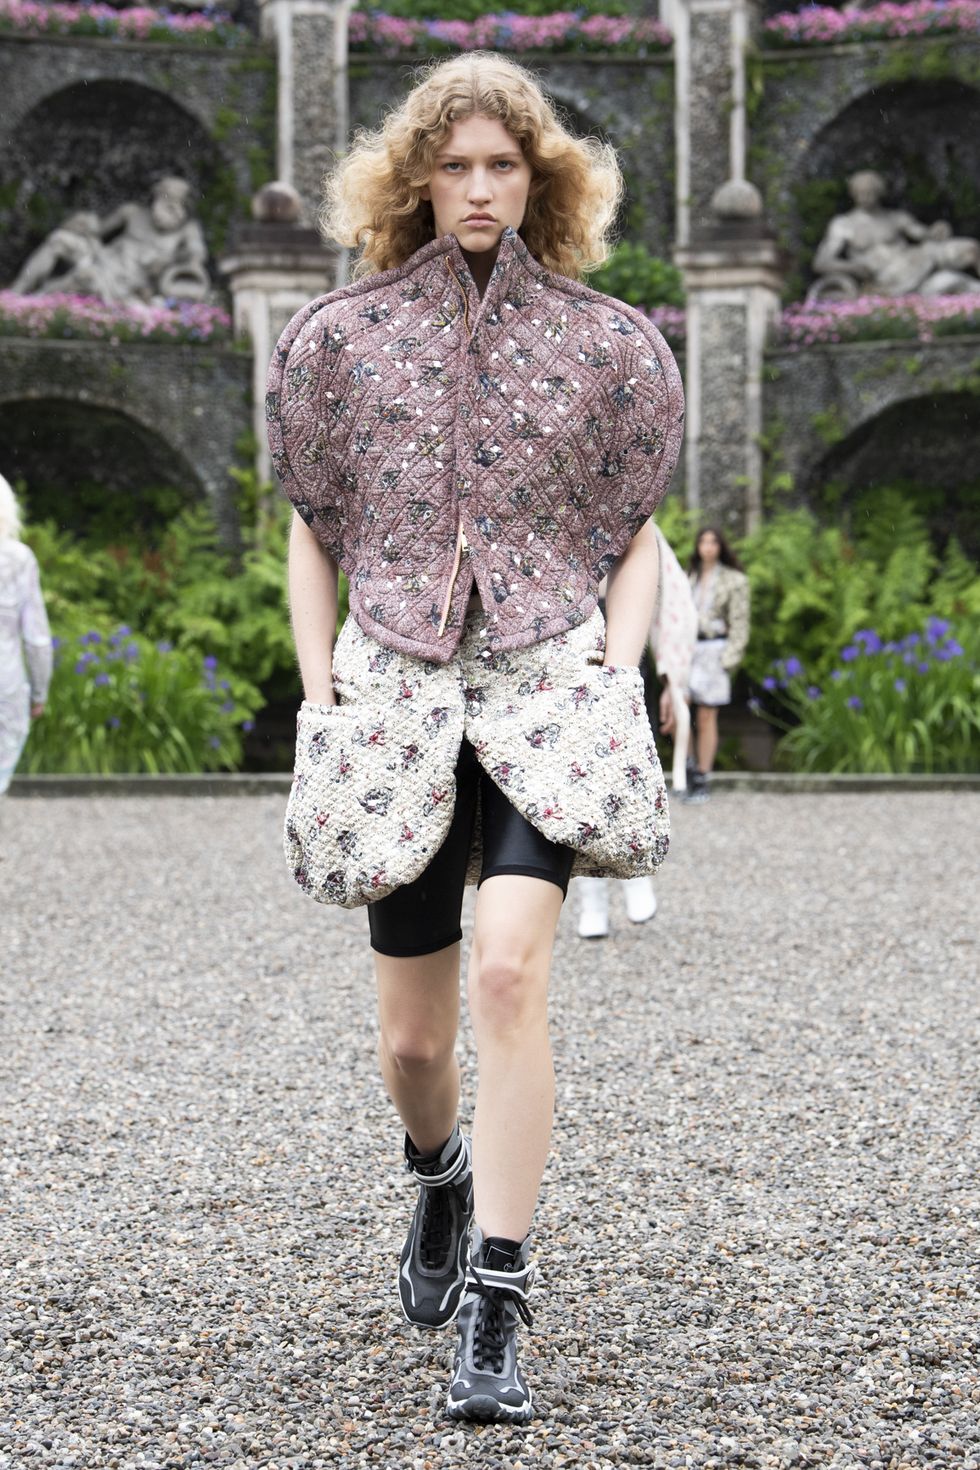 Louis Vuitton Staged Their Cruise 2024 Collection on an Island